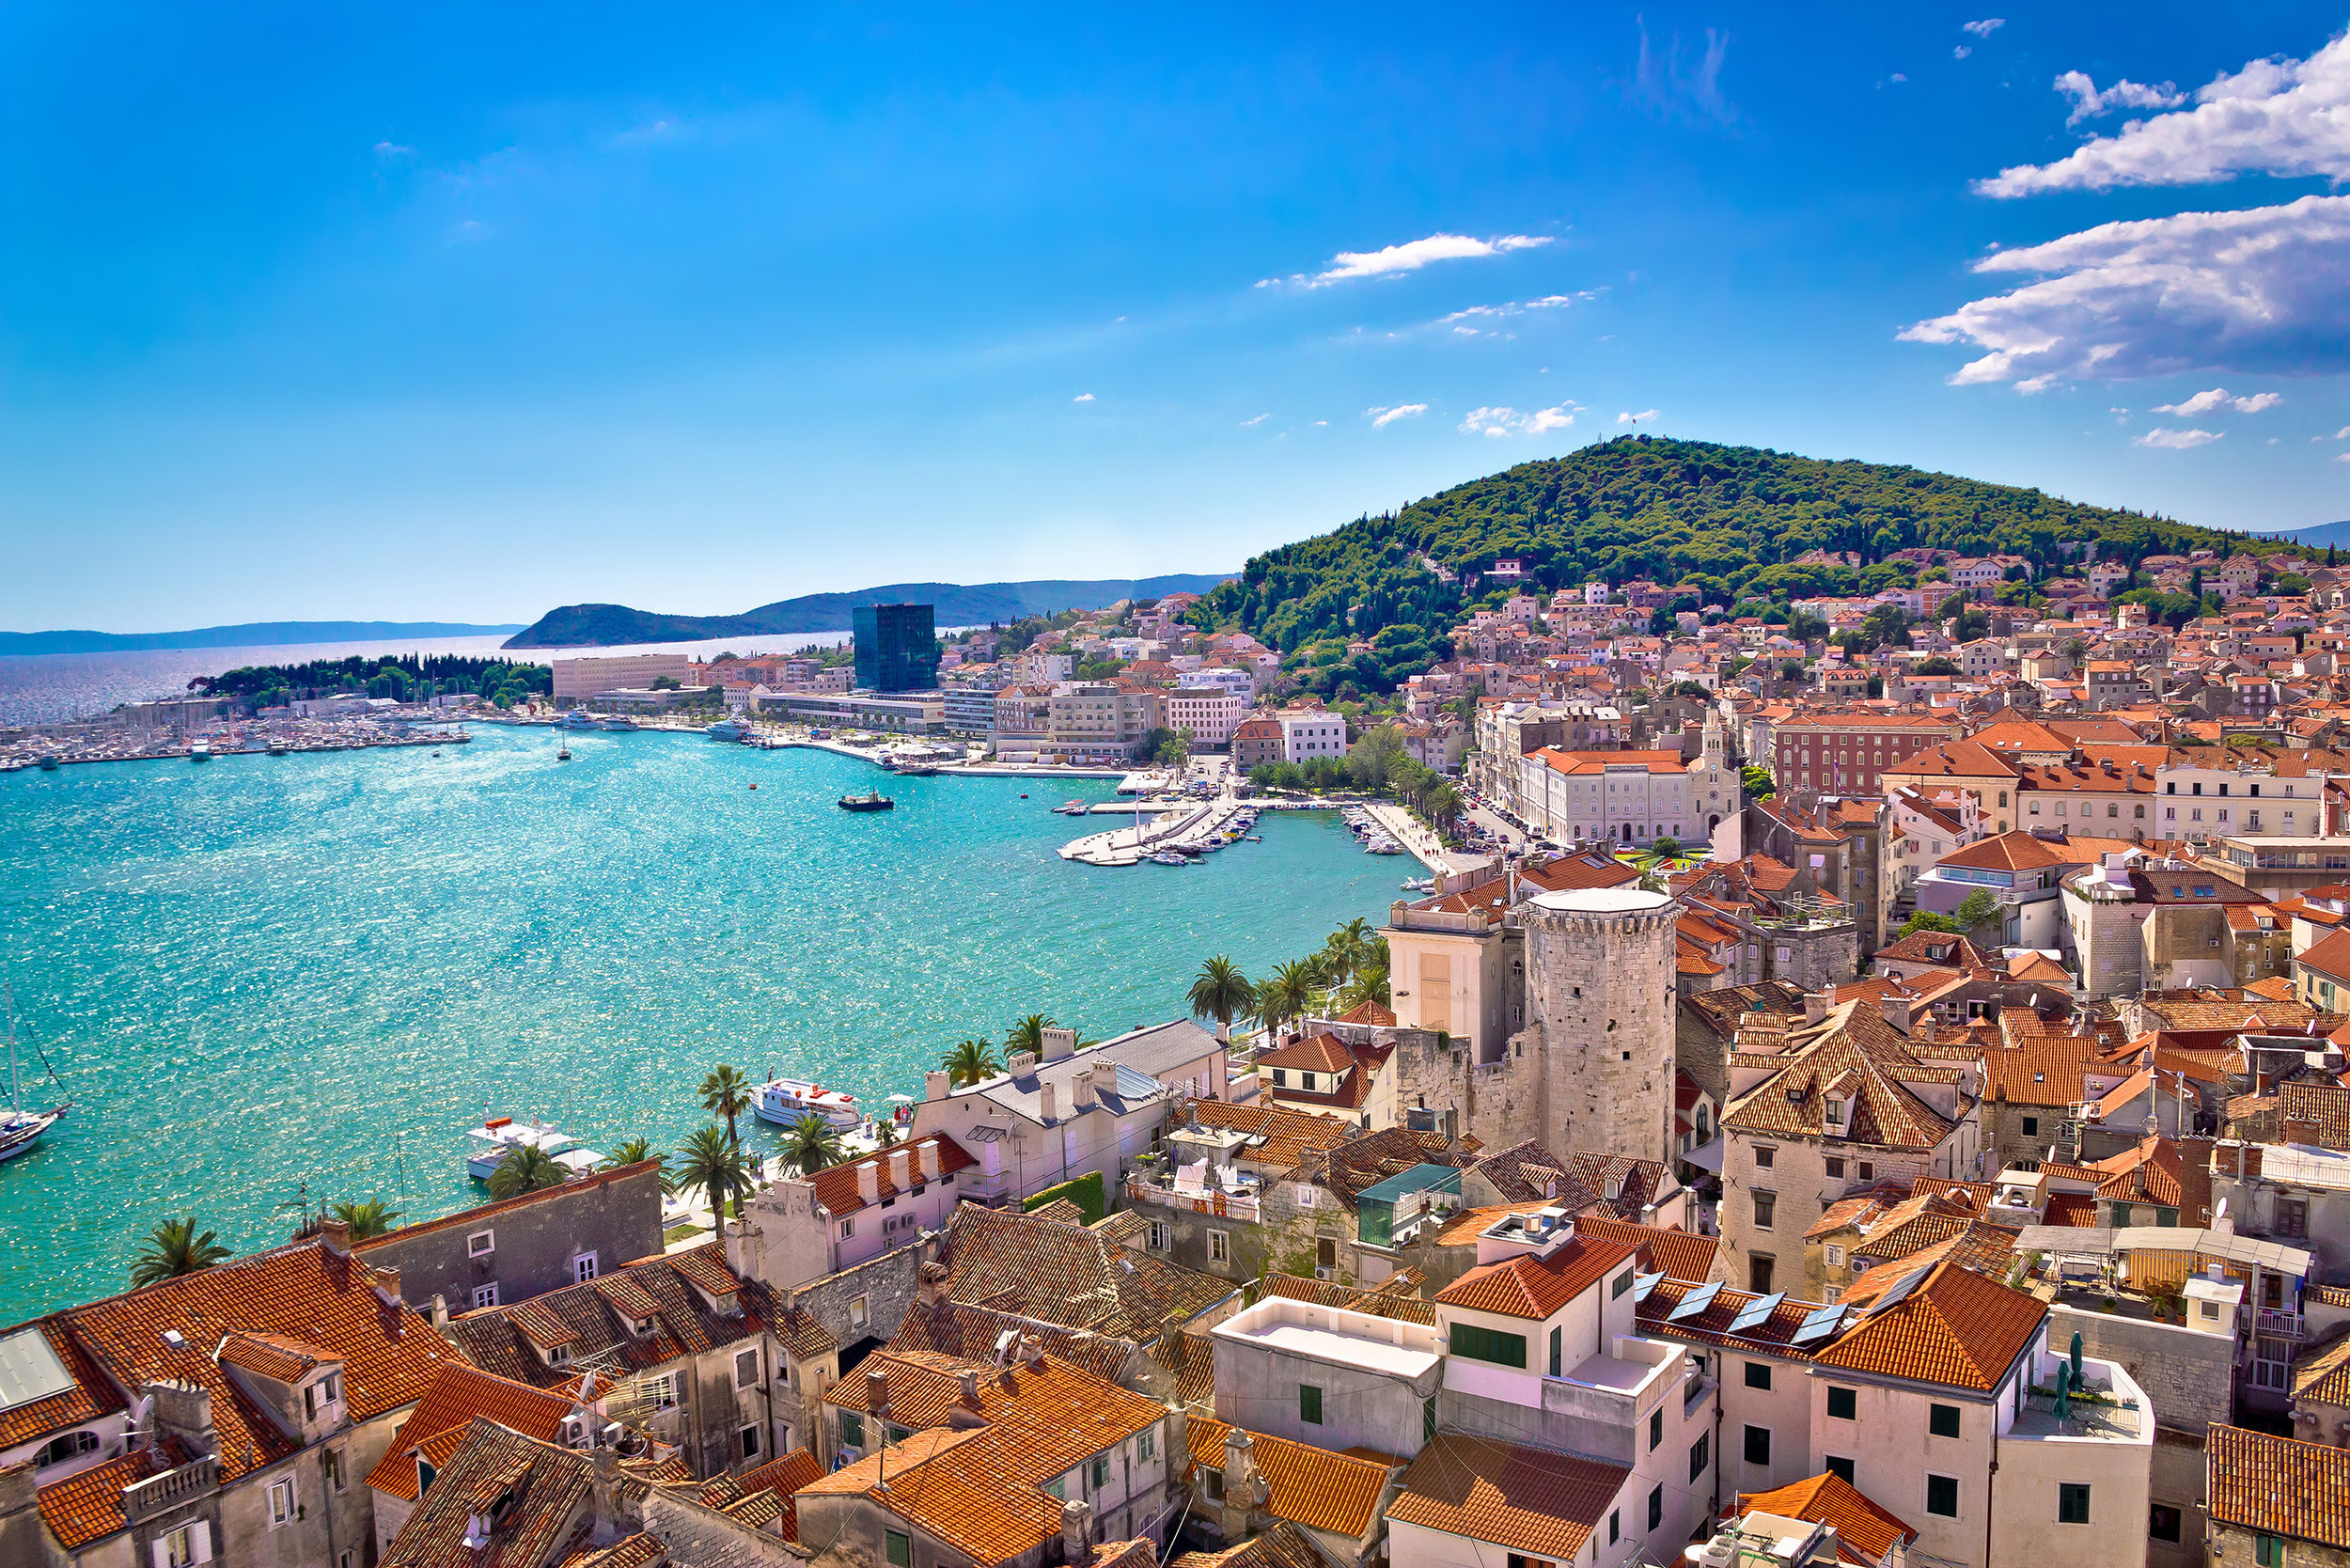 <p>Travelers flock to southern Croatia for a reason: it’s amazing. Rent a car in Split or Dubrovnik, take a ferry to an island, check out Zadar and Cavat, and then head to Montenegro. Must-sees in this country include Herceg Novi, Kotor, and Budva.</p><p>You may also like: <a href='https://www.yardbarker.com/lifestyle/articles/20_beauty_and_skincare_hacks_that_actually_work_040224/s1__35260895'>20 beauty and skincare hacks that actually work</a></p>